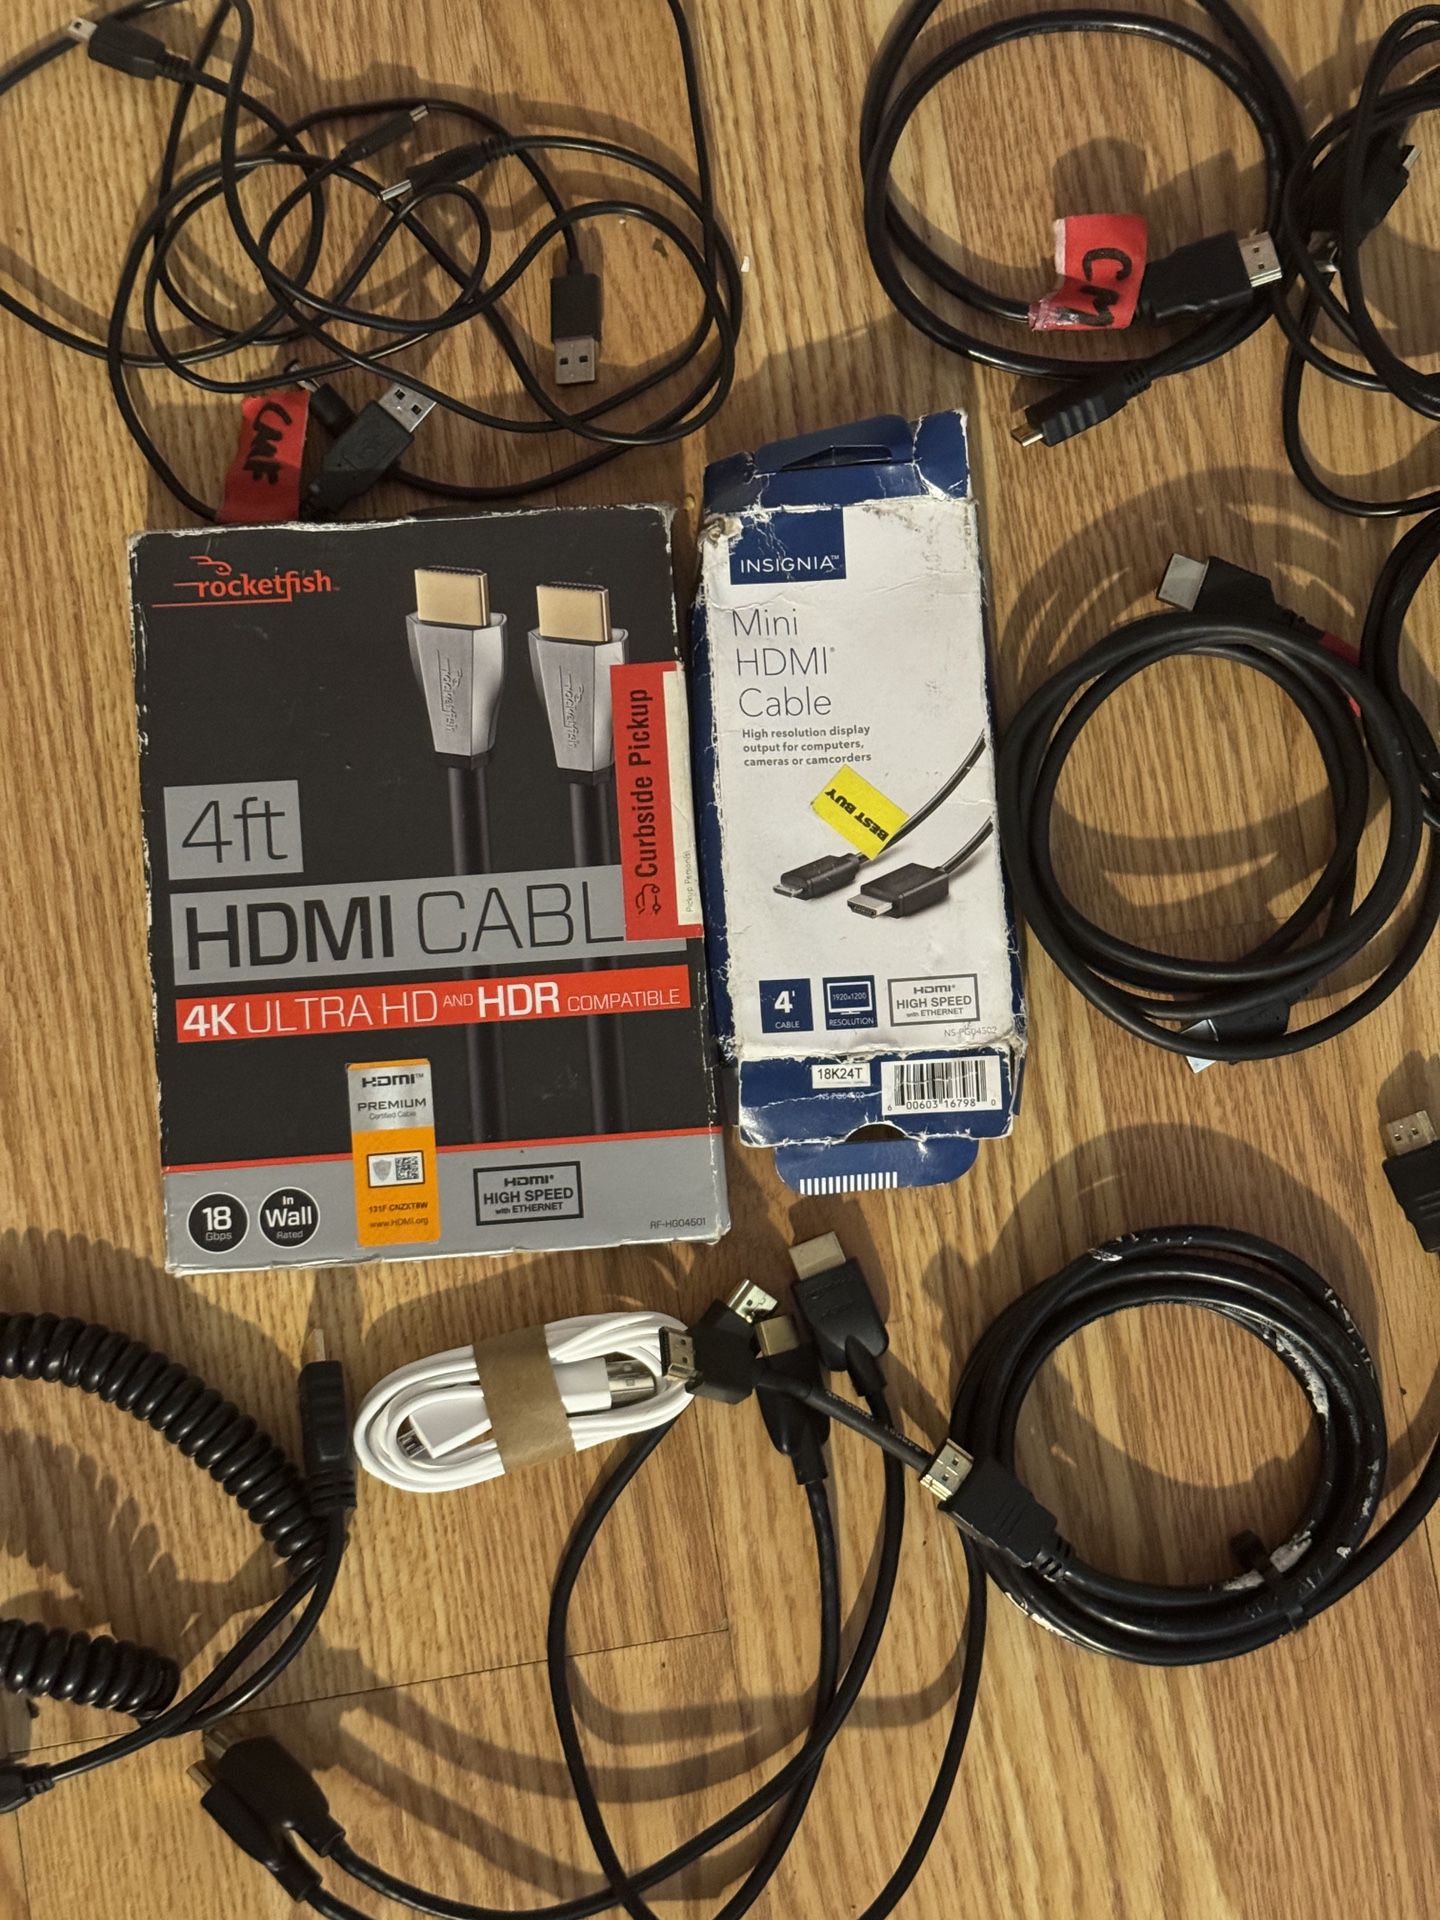 HDMI CABLES + HDMI to HDMI MINI + OTHER CABLES 